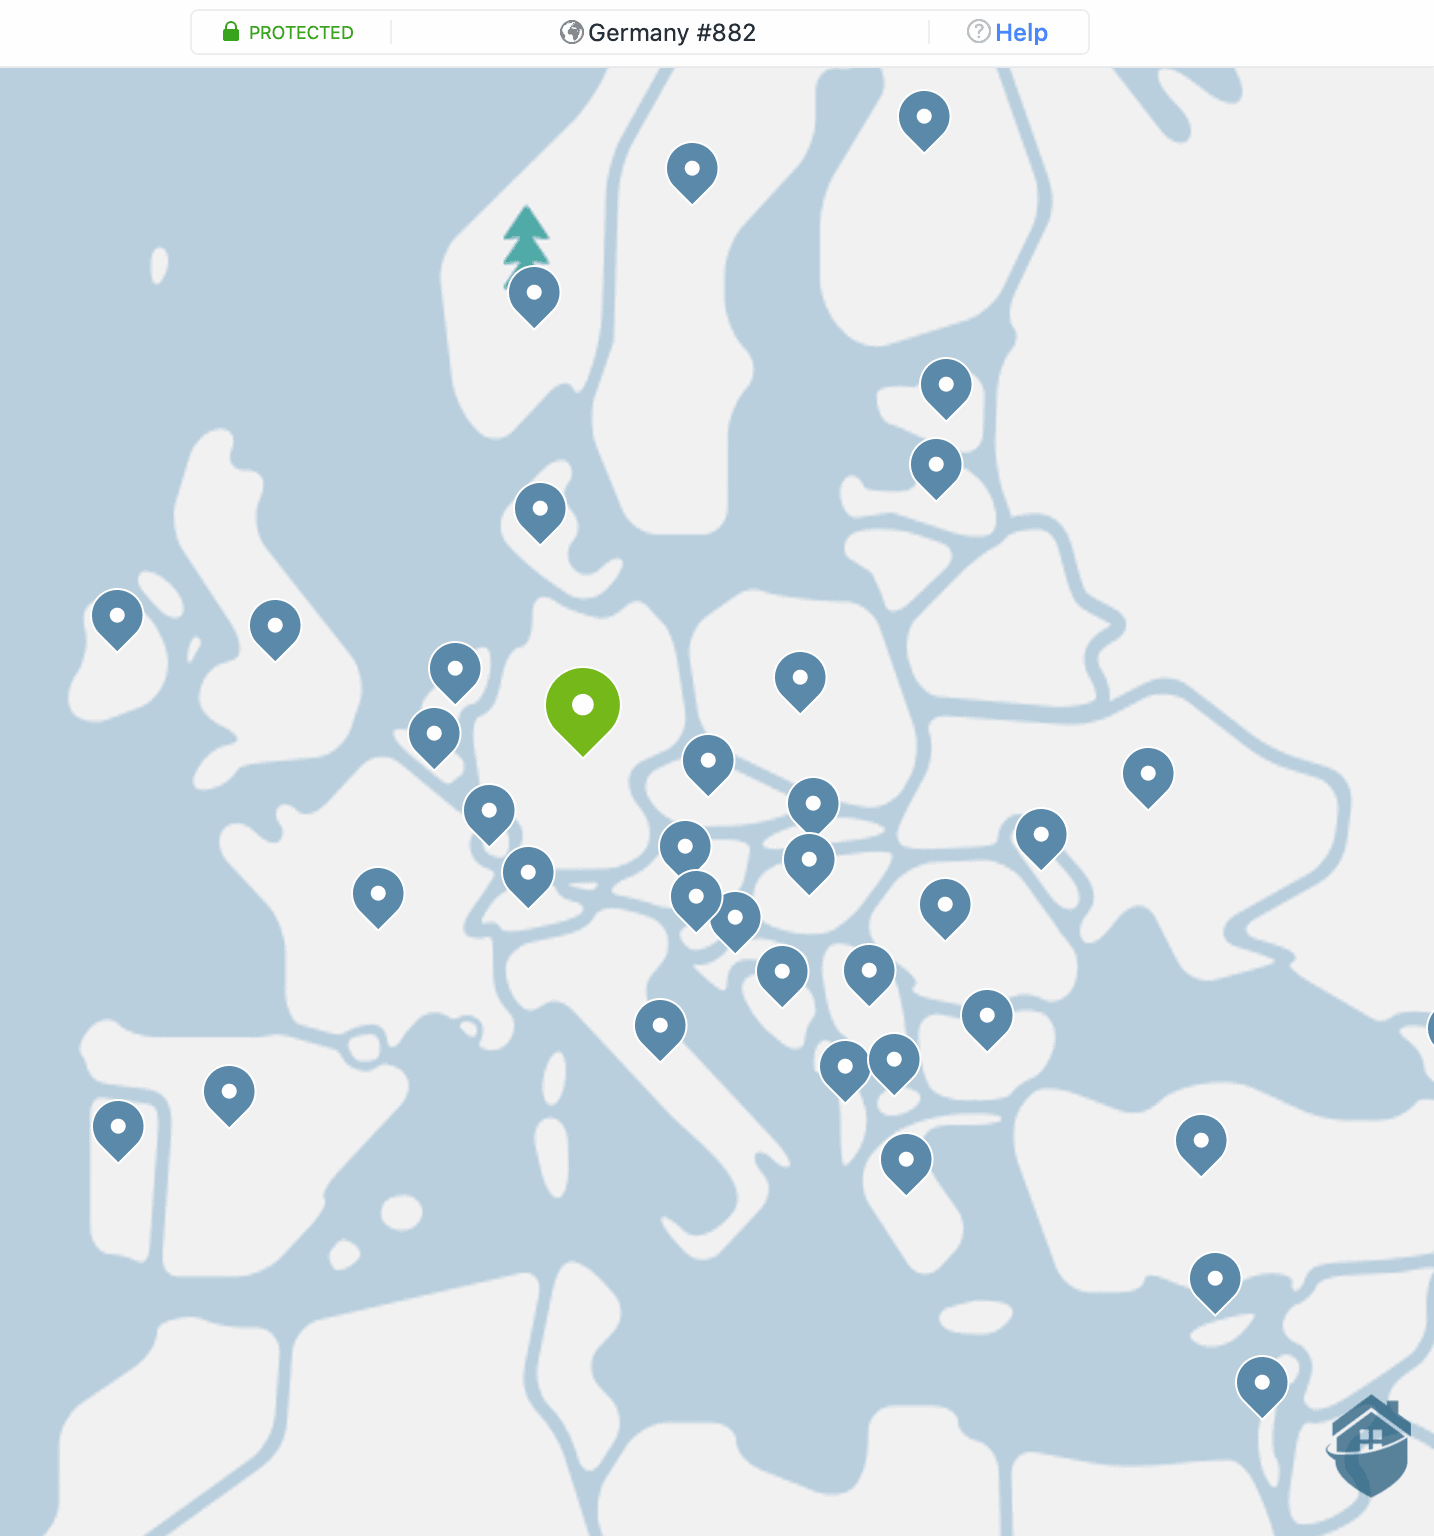 Connected in Germany using NordVPN